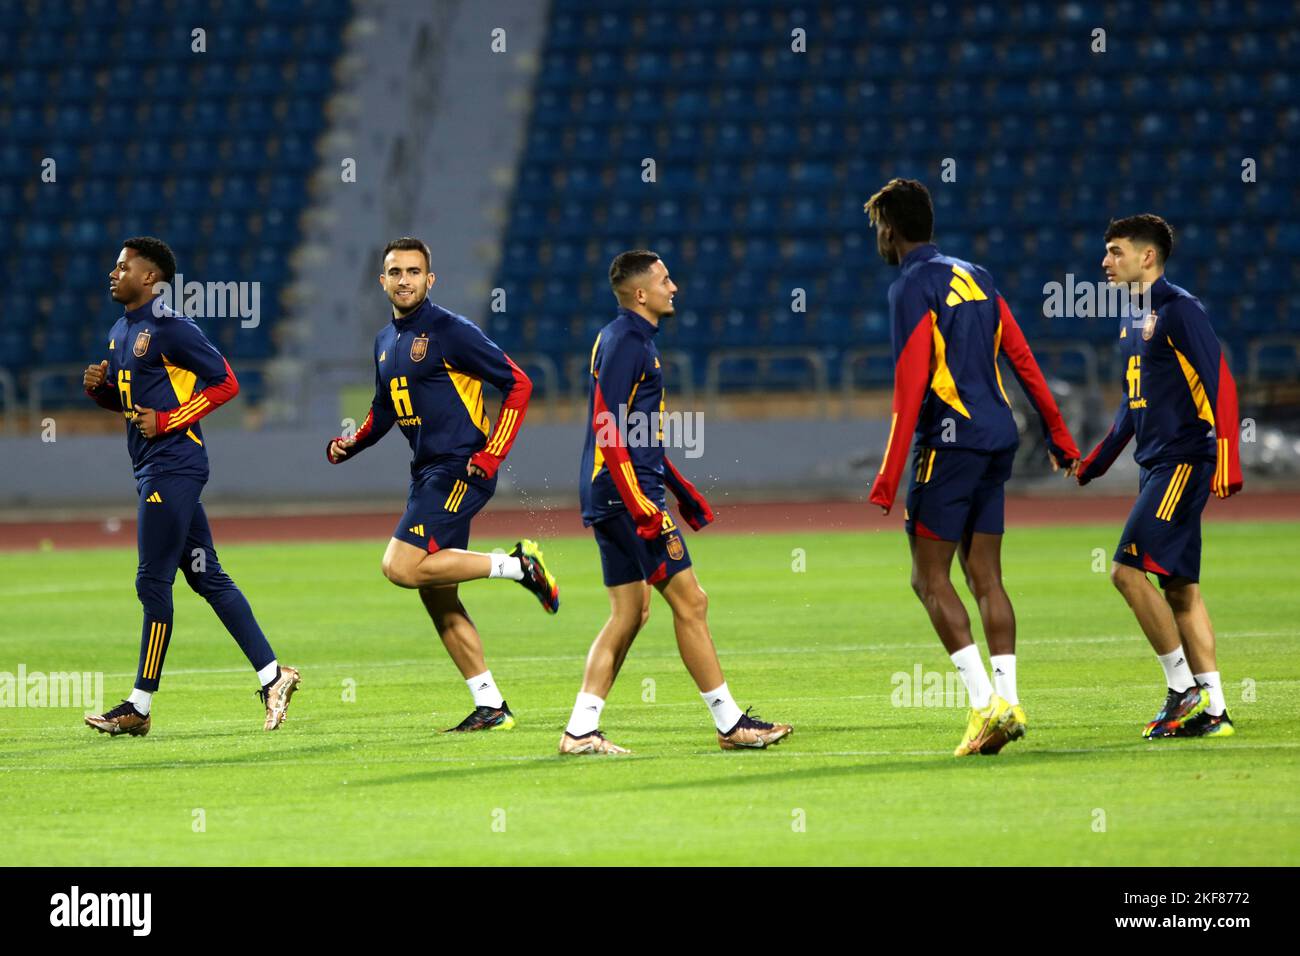 Amman, Jordan. 16th Nov, 2022. Spanish national football team players warm up during their training session in Amman, Jordan, Nov. 16, 2022. Spain will face Jordan in their international friendly match in Amman on Thursday, the squad's last match before they head to Qatar for the World Cup. Credit: Mohammad Abu Ghosh/Xinhua/Alamy Live News Stock Photo